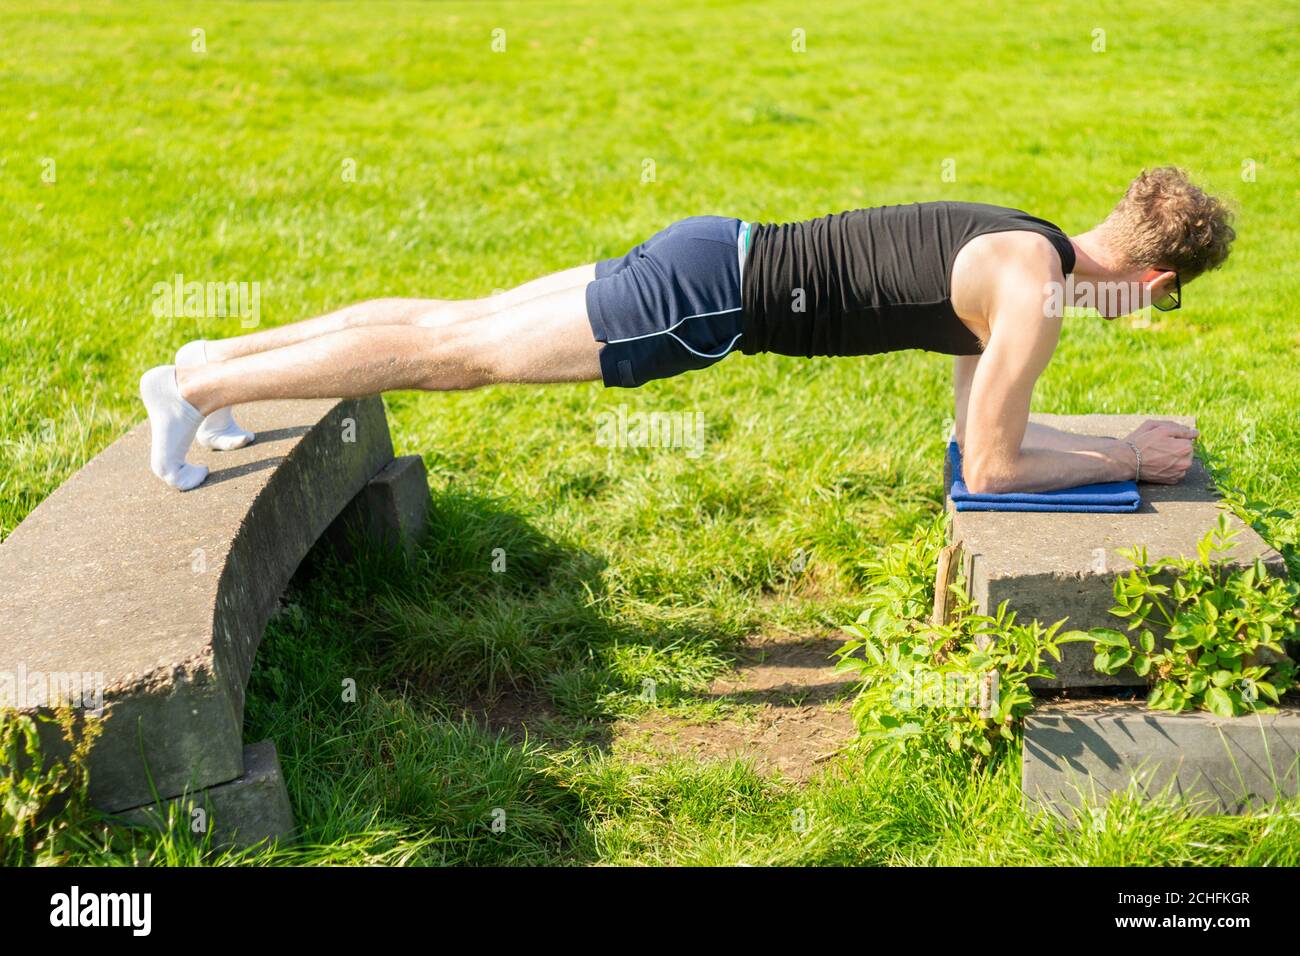 Young man performing plank exercise in an outdoors environment. Strengthen core muscles, exercise, keep fit, health Stock Photo